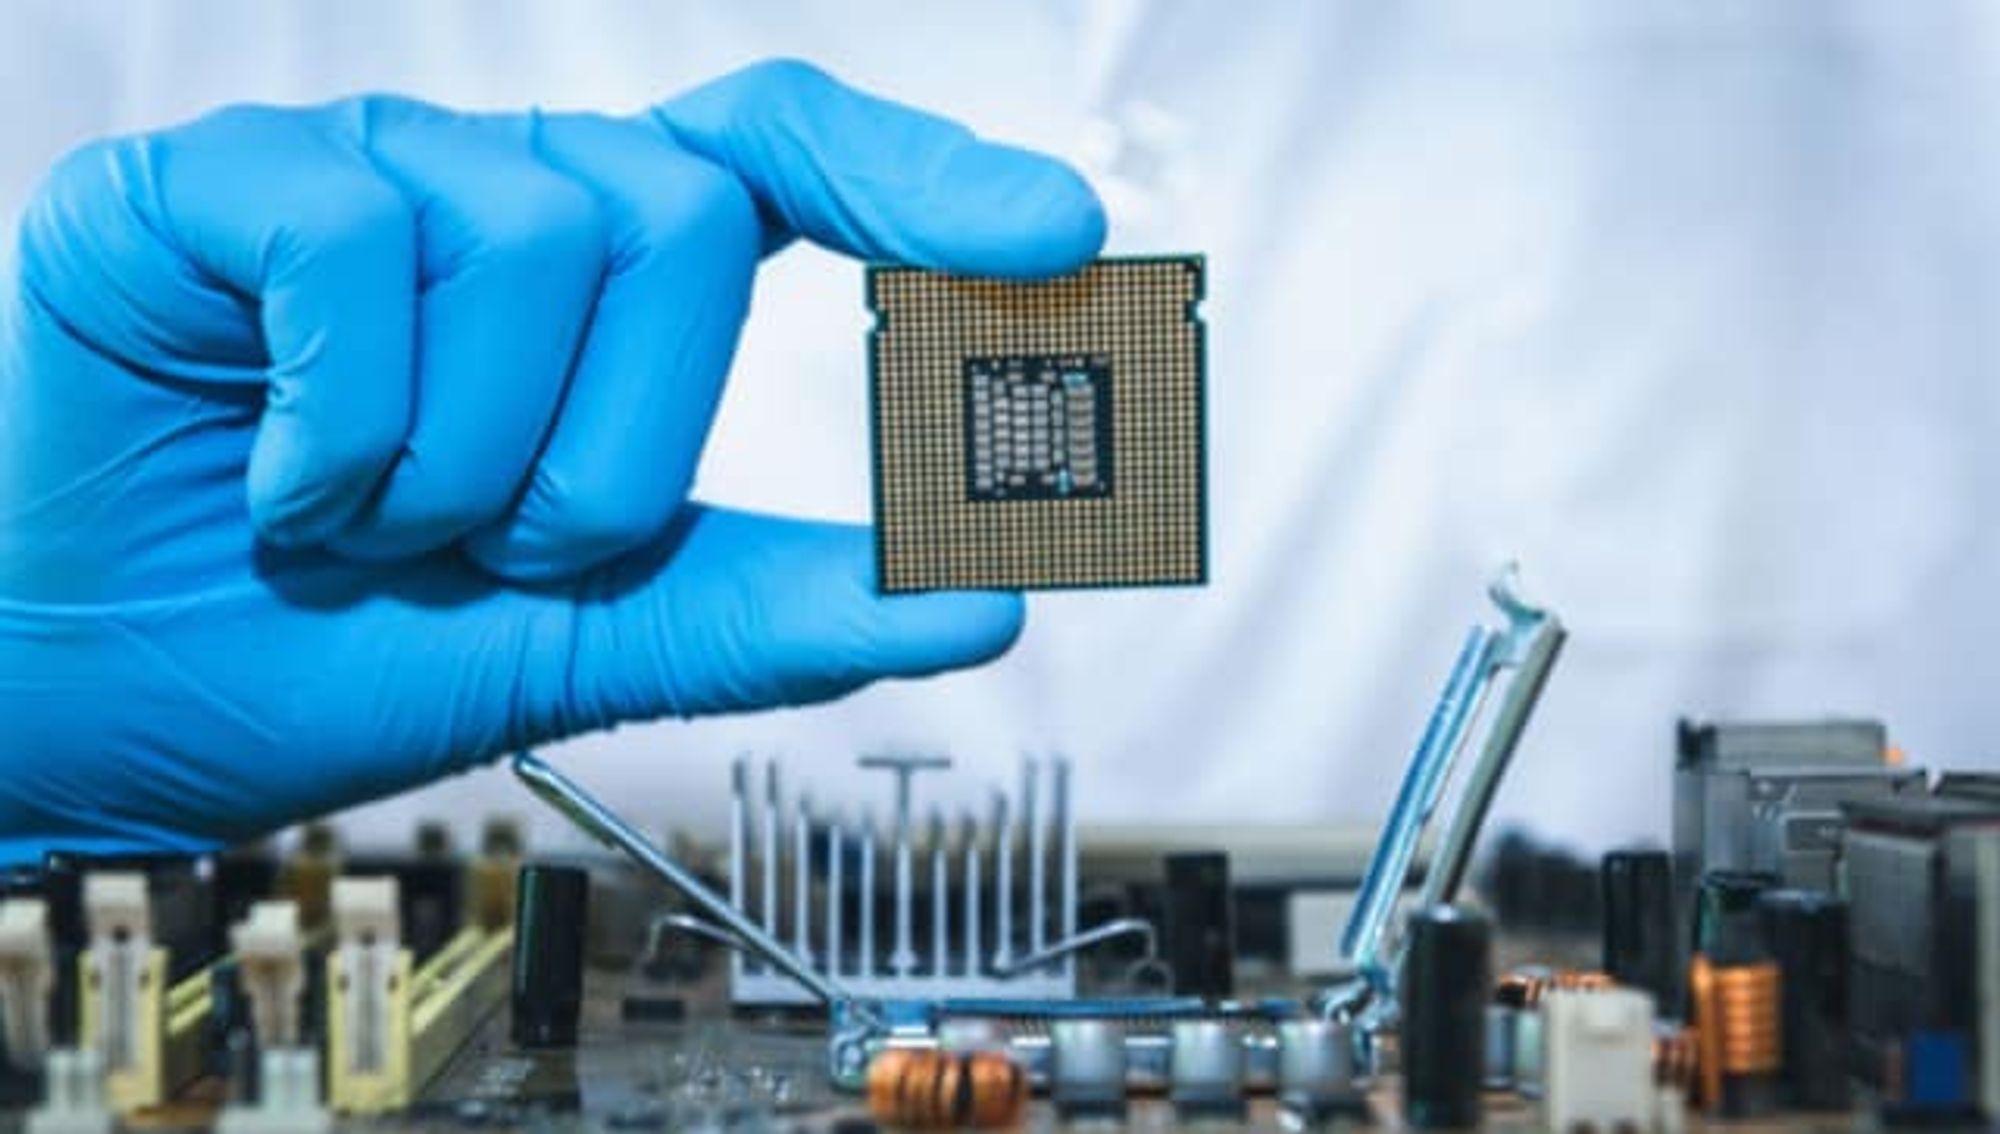 The semiconductor monopoly: How one Dutch company has a stranglehold over the global chip industry